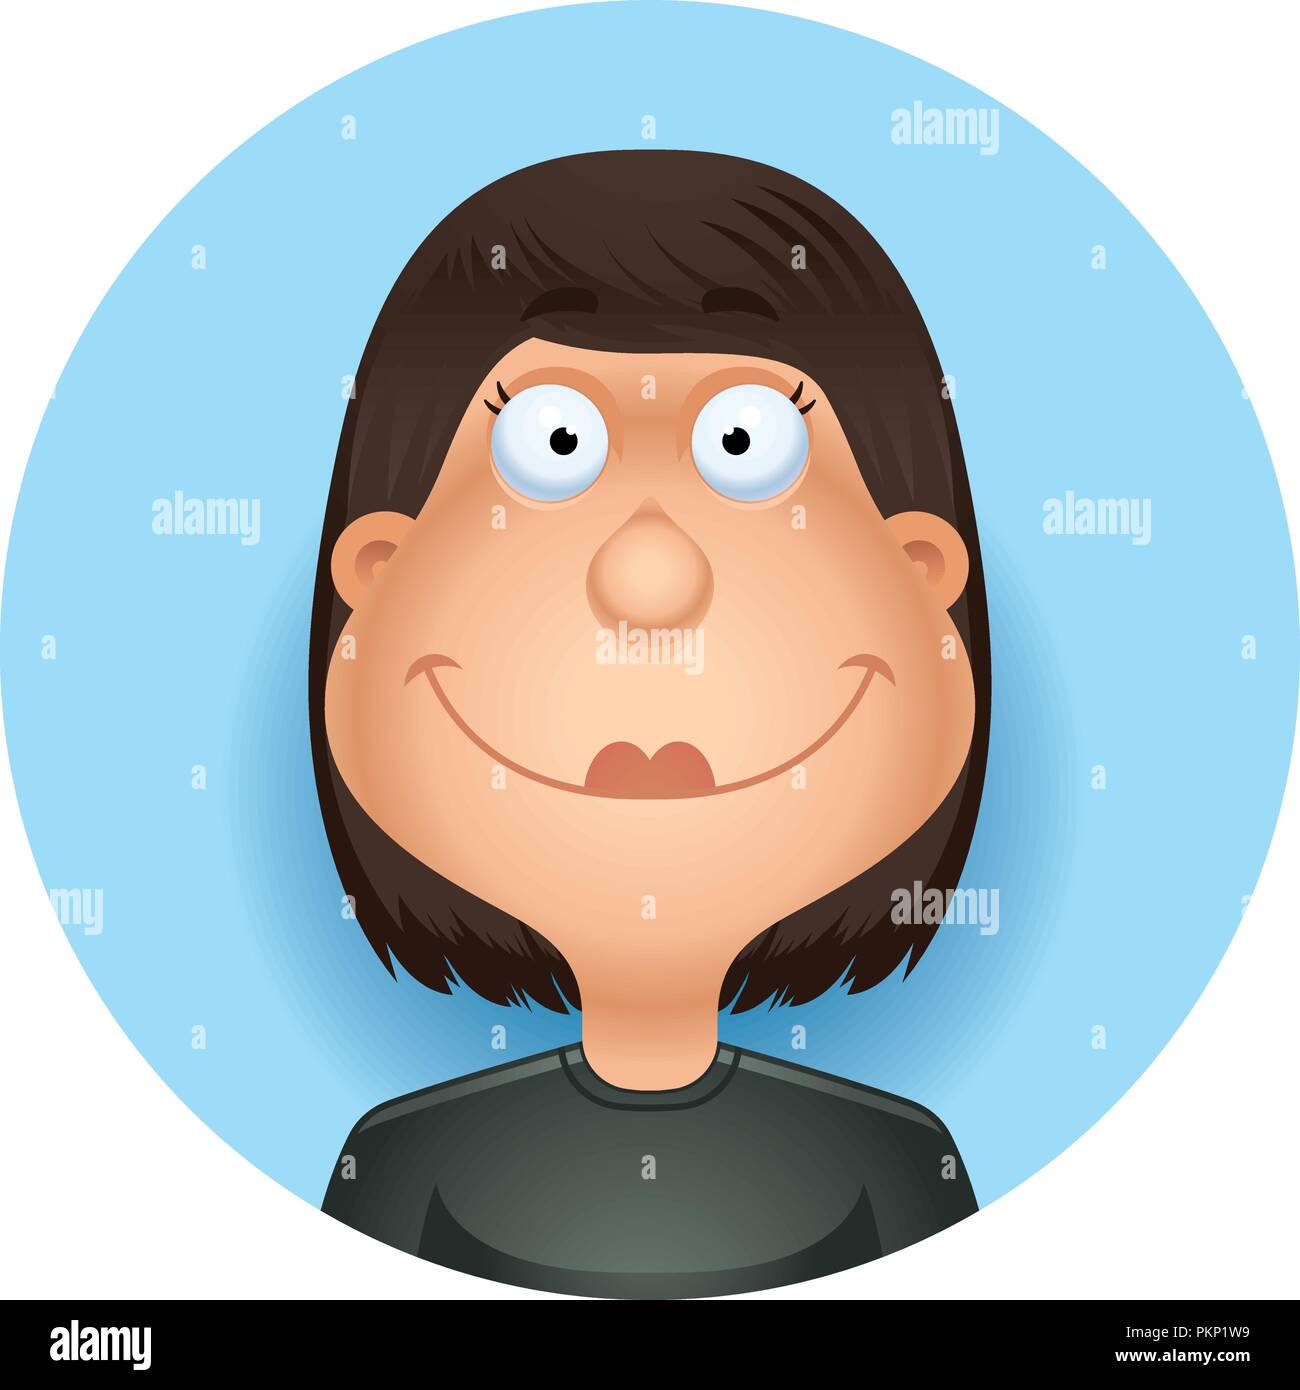 A cartoon illustration of a Hispanic woman smiling  looking happy. Stock Vector